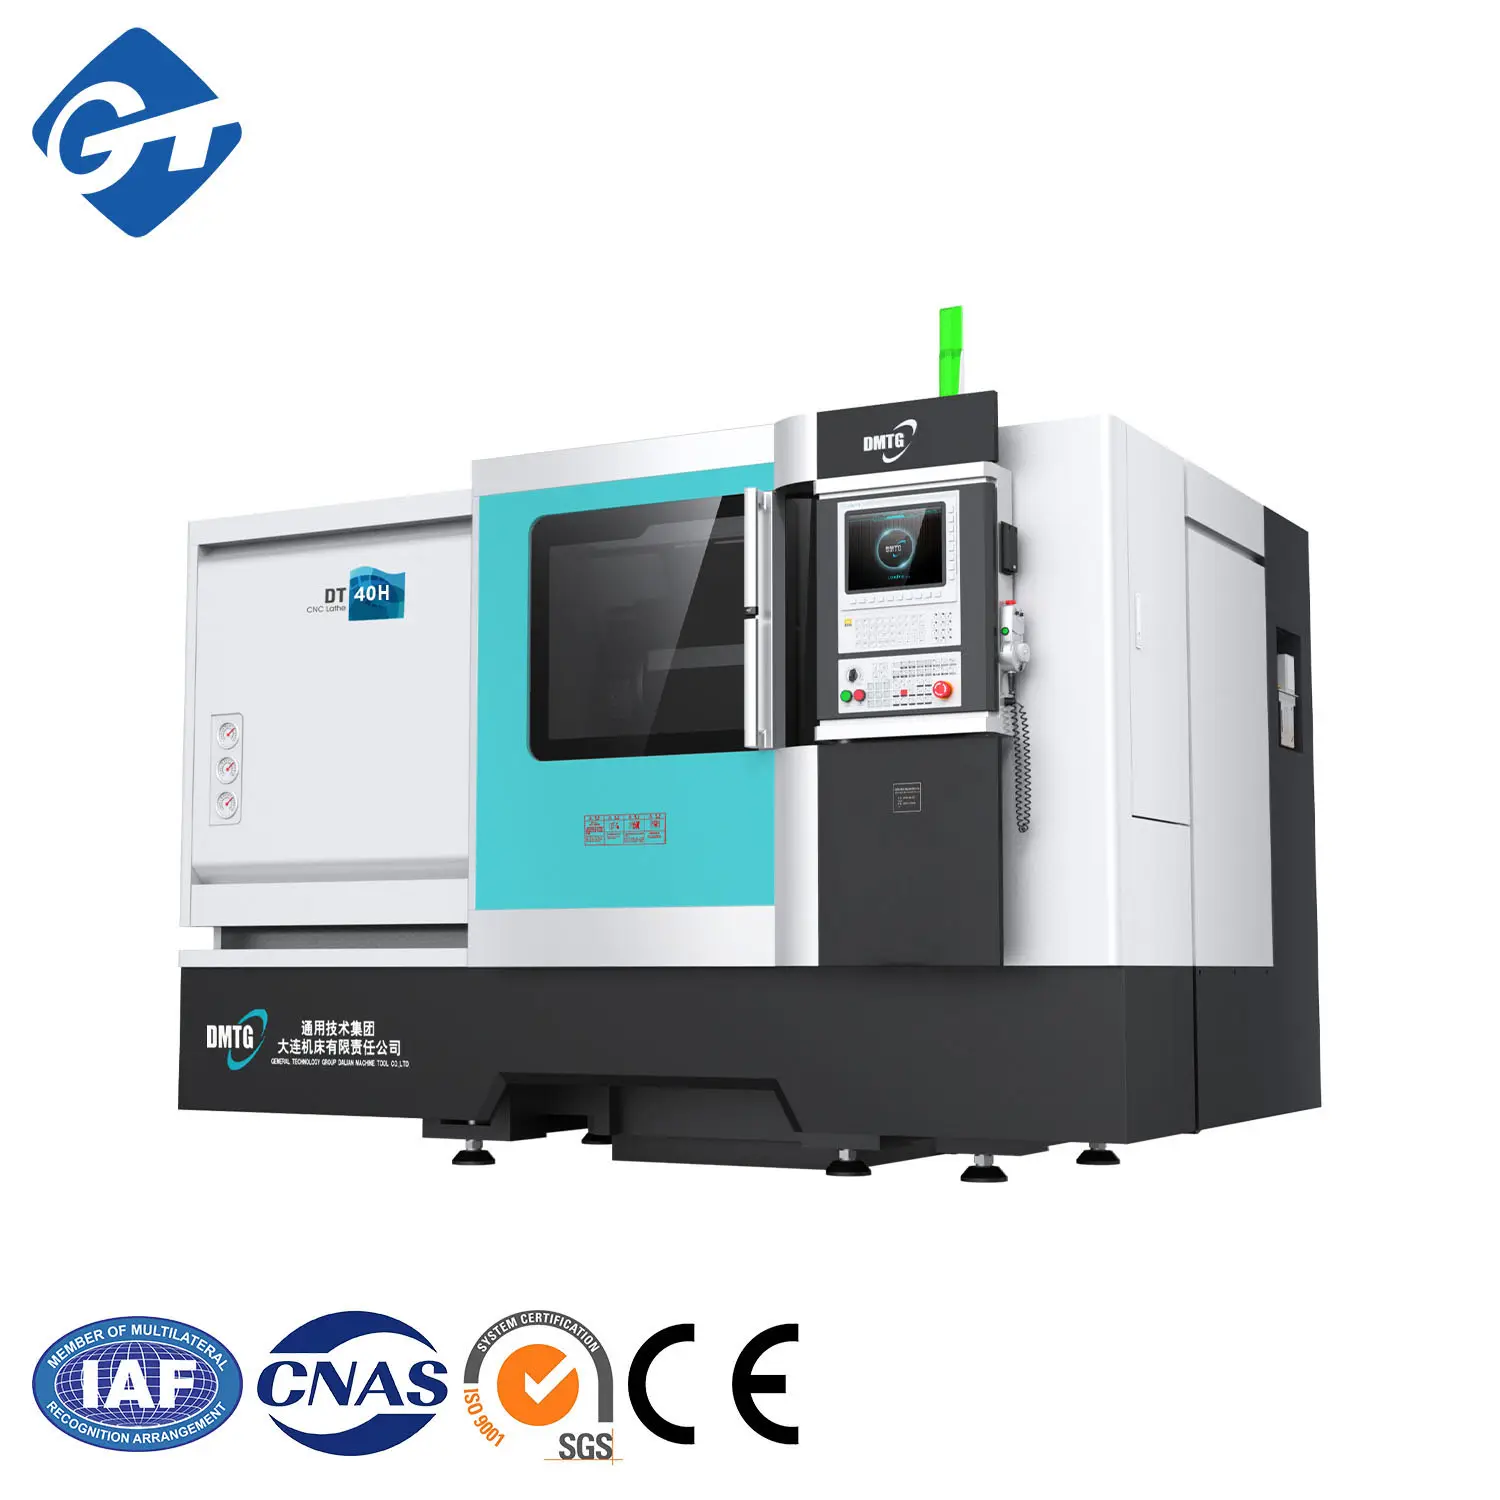 GT DMTG DT40H 4 Axis CNC Turning Lathe Center Live Tooling Turret Automatic Slant Bed CNC Lathe Z/Y Axis Torno CNC Lathe Machine